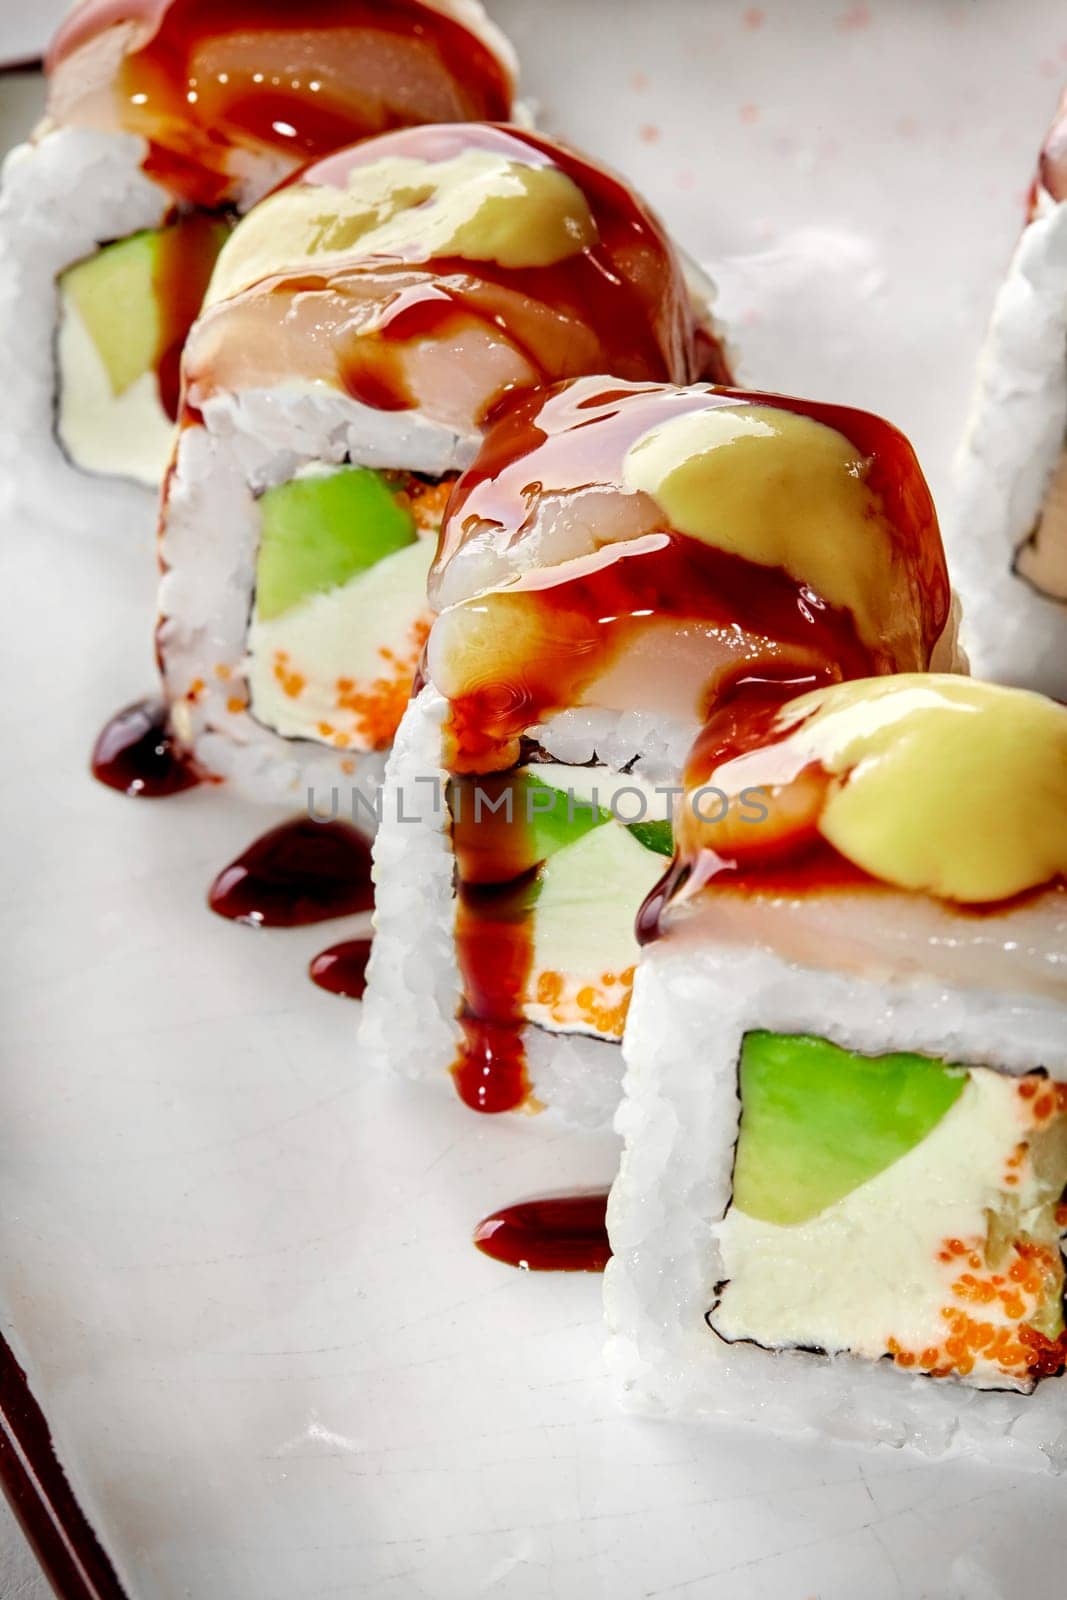 Closeup of sushi rolls filled with cream cheese, tobiko and avocado topped with sea scallop and drizzled with spicy mayo and savory unagi sauce, served on plate. Japanese cuisine